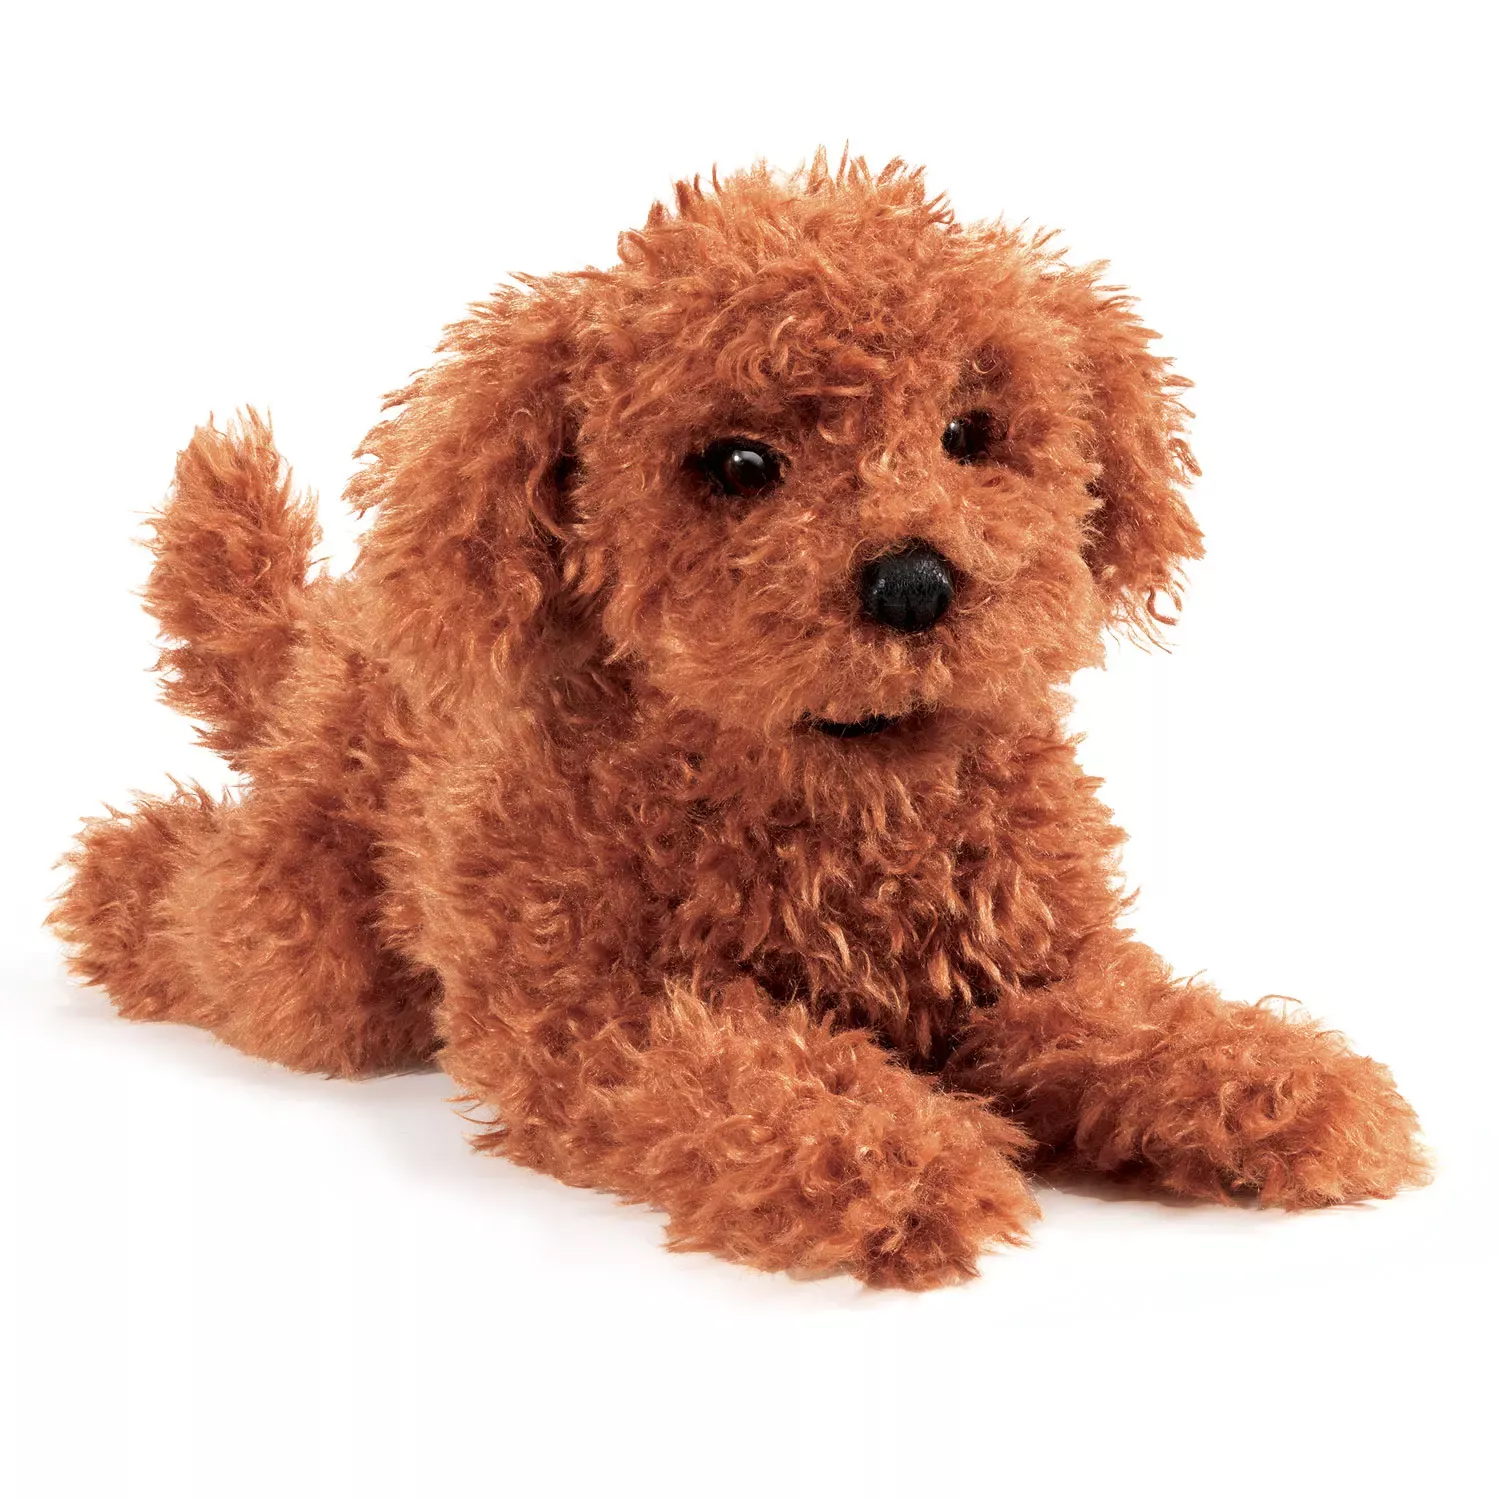 Folkmanis hand puppet toy poodle